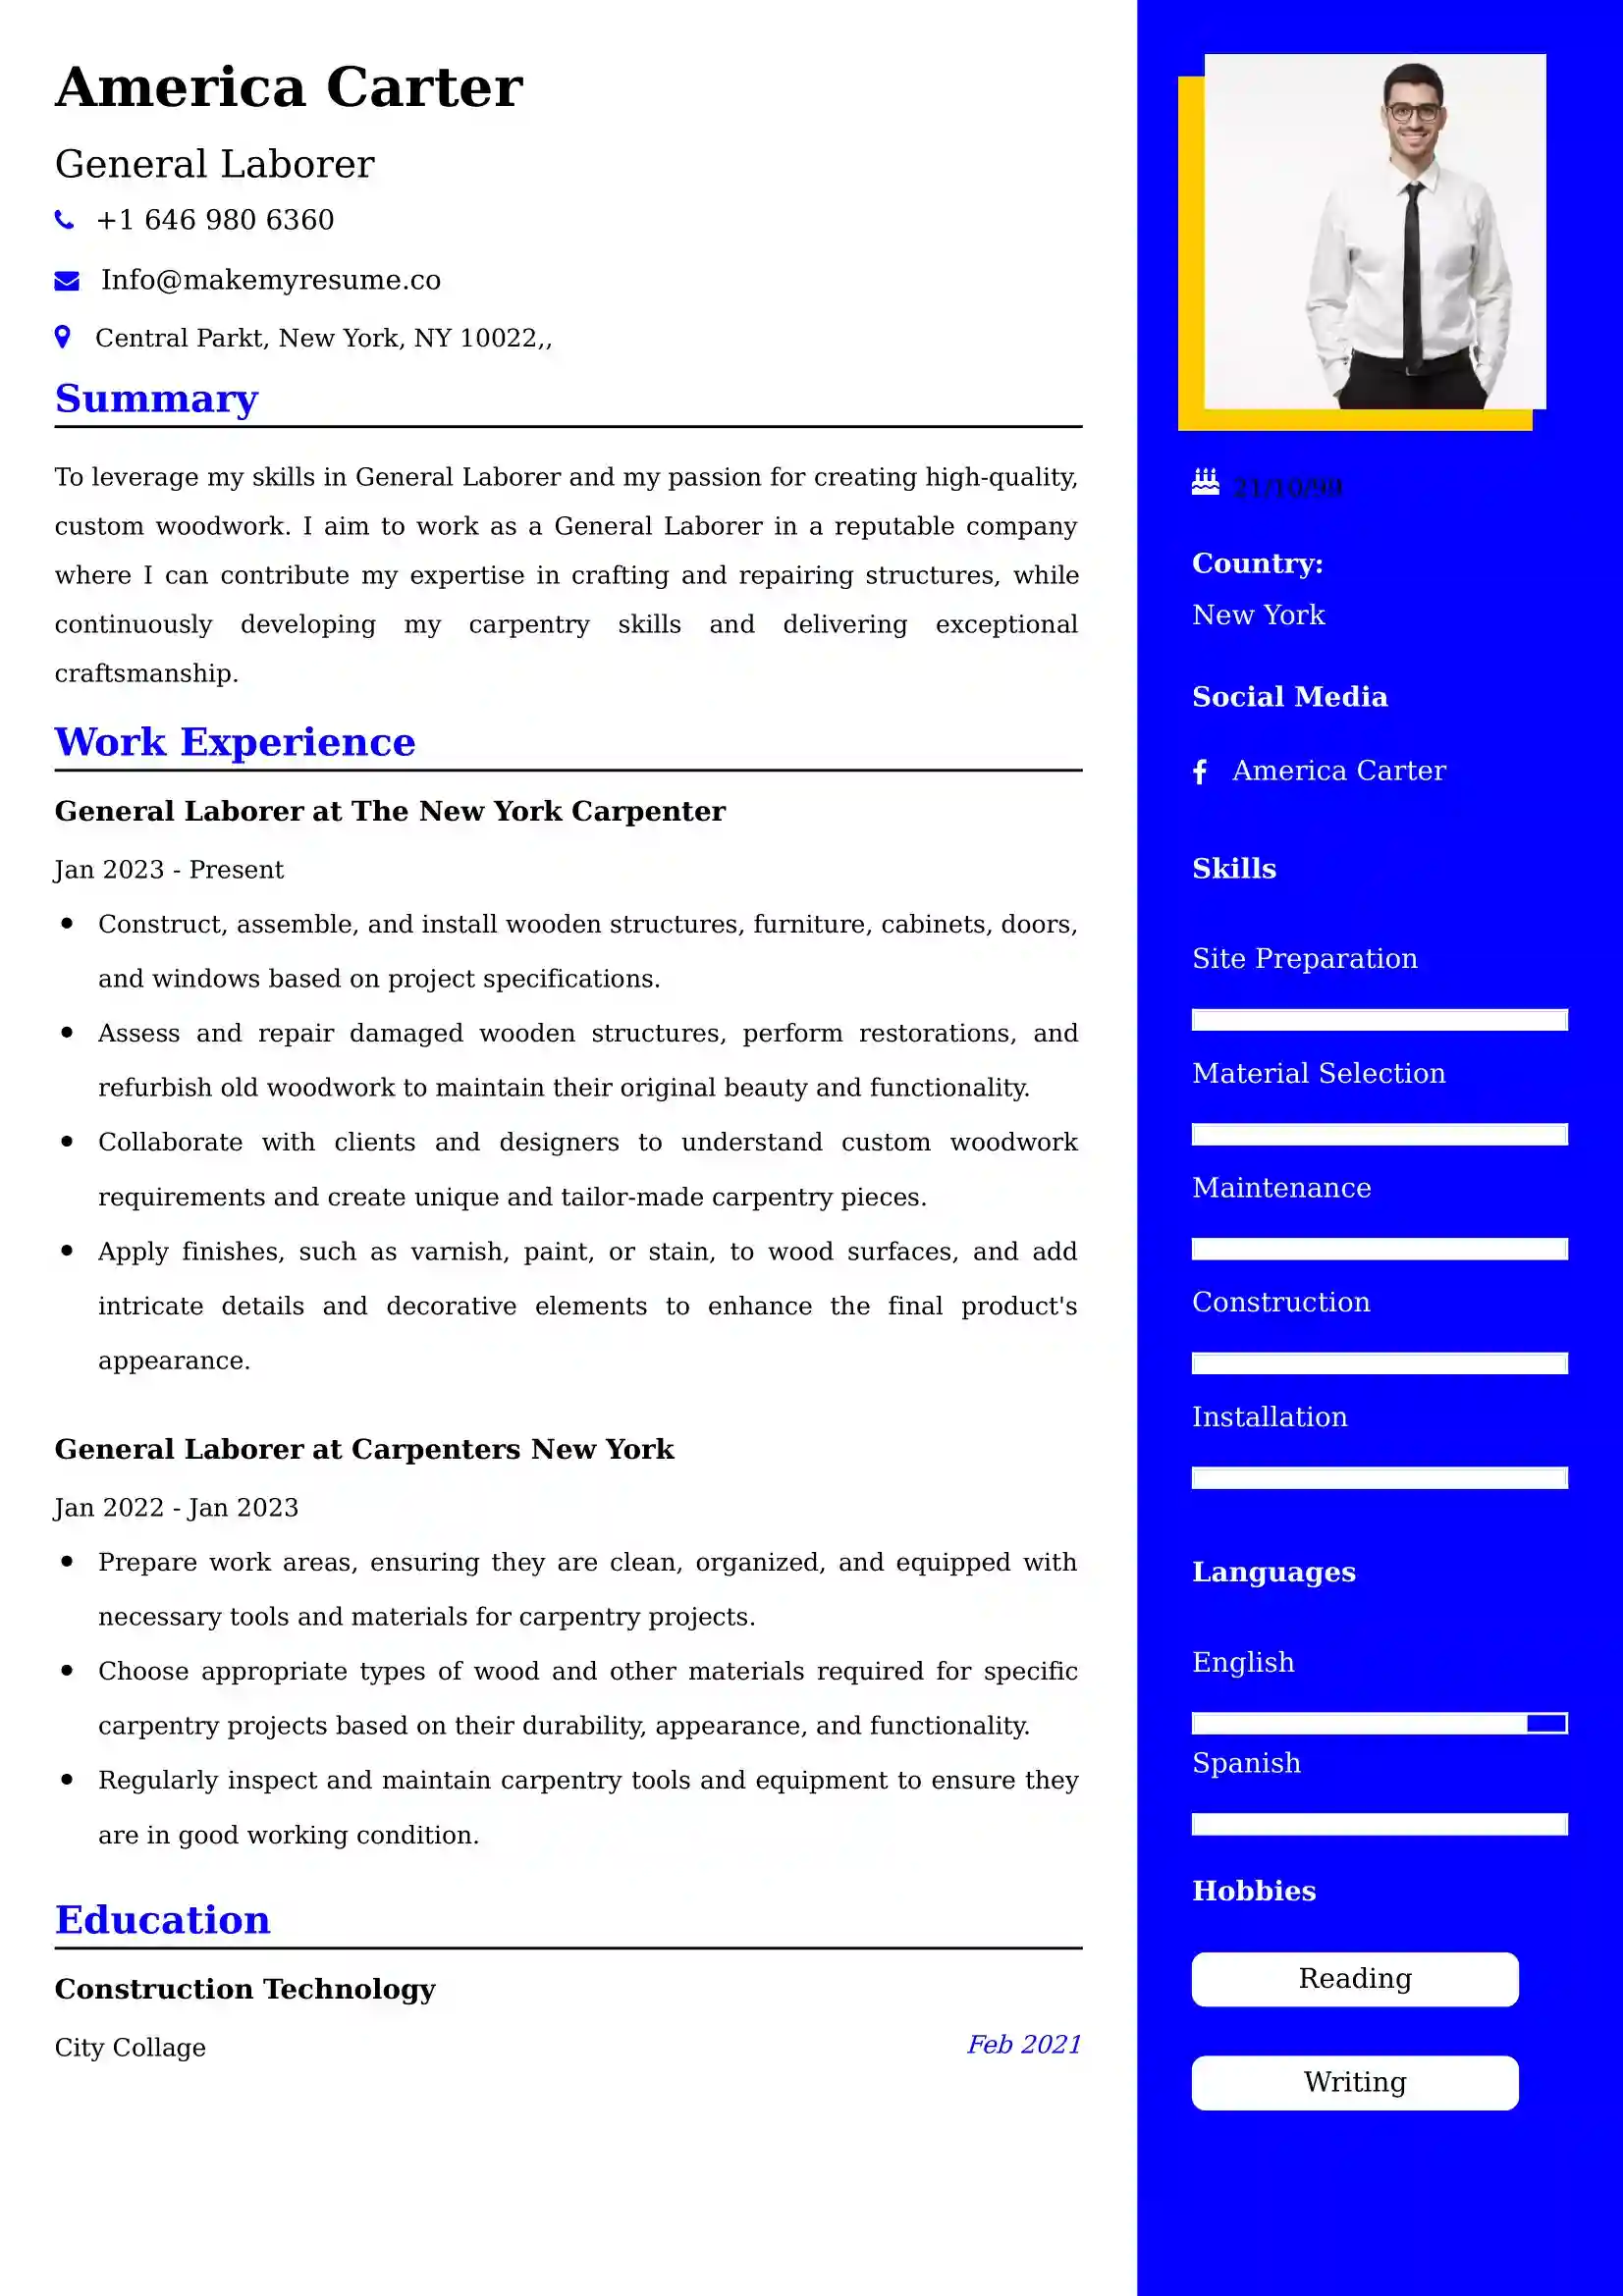 General Laborer Resume Examples - UK Format, Latest Template.